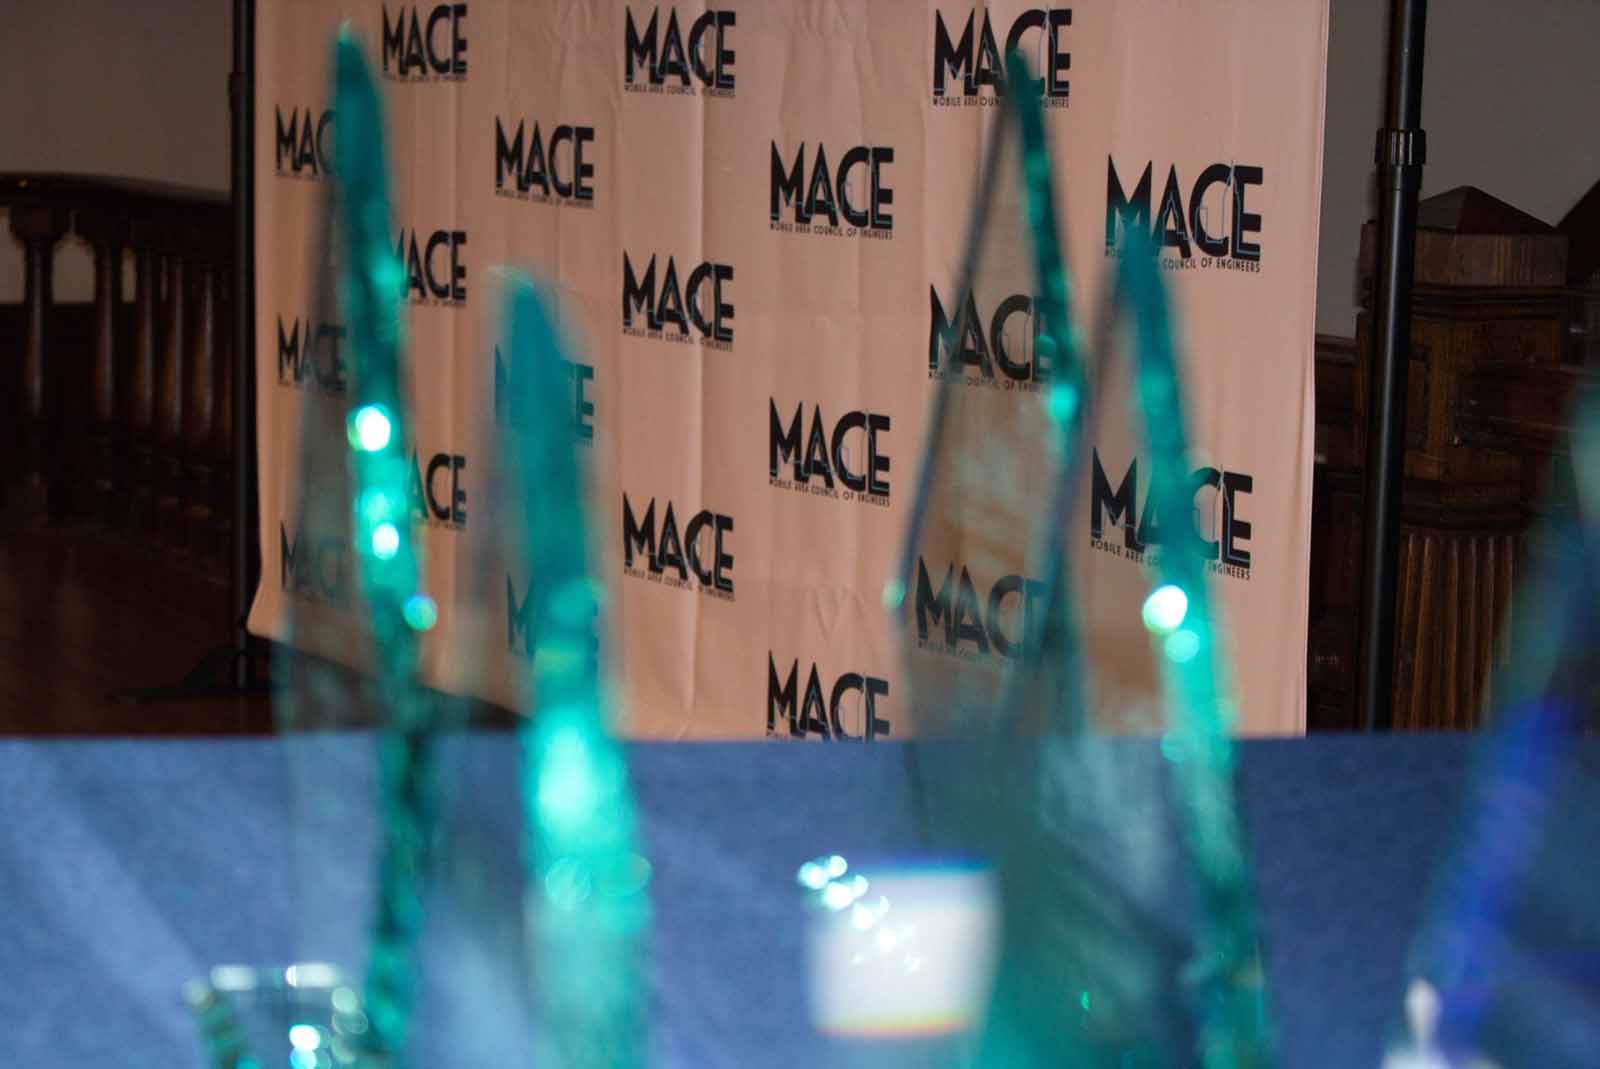 Tickets/Sponsorships Available For MACE Awards